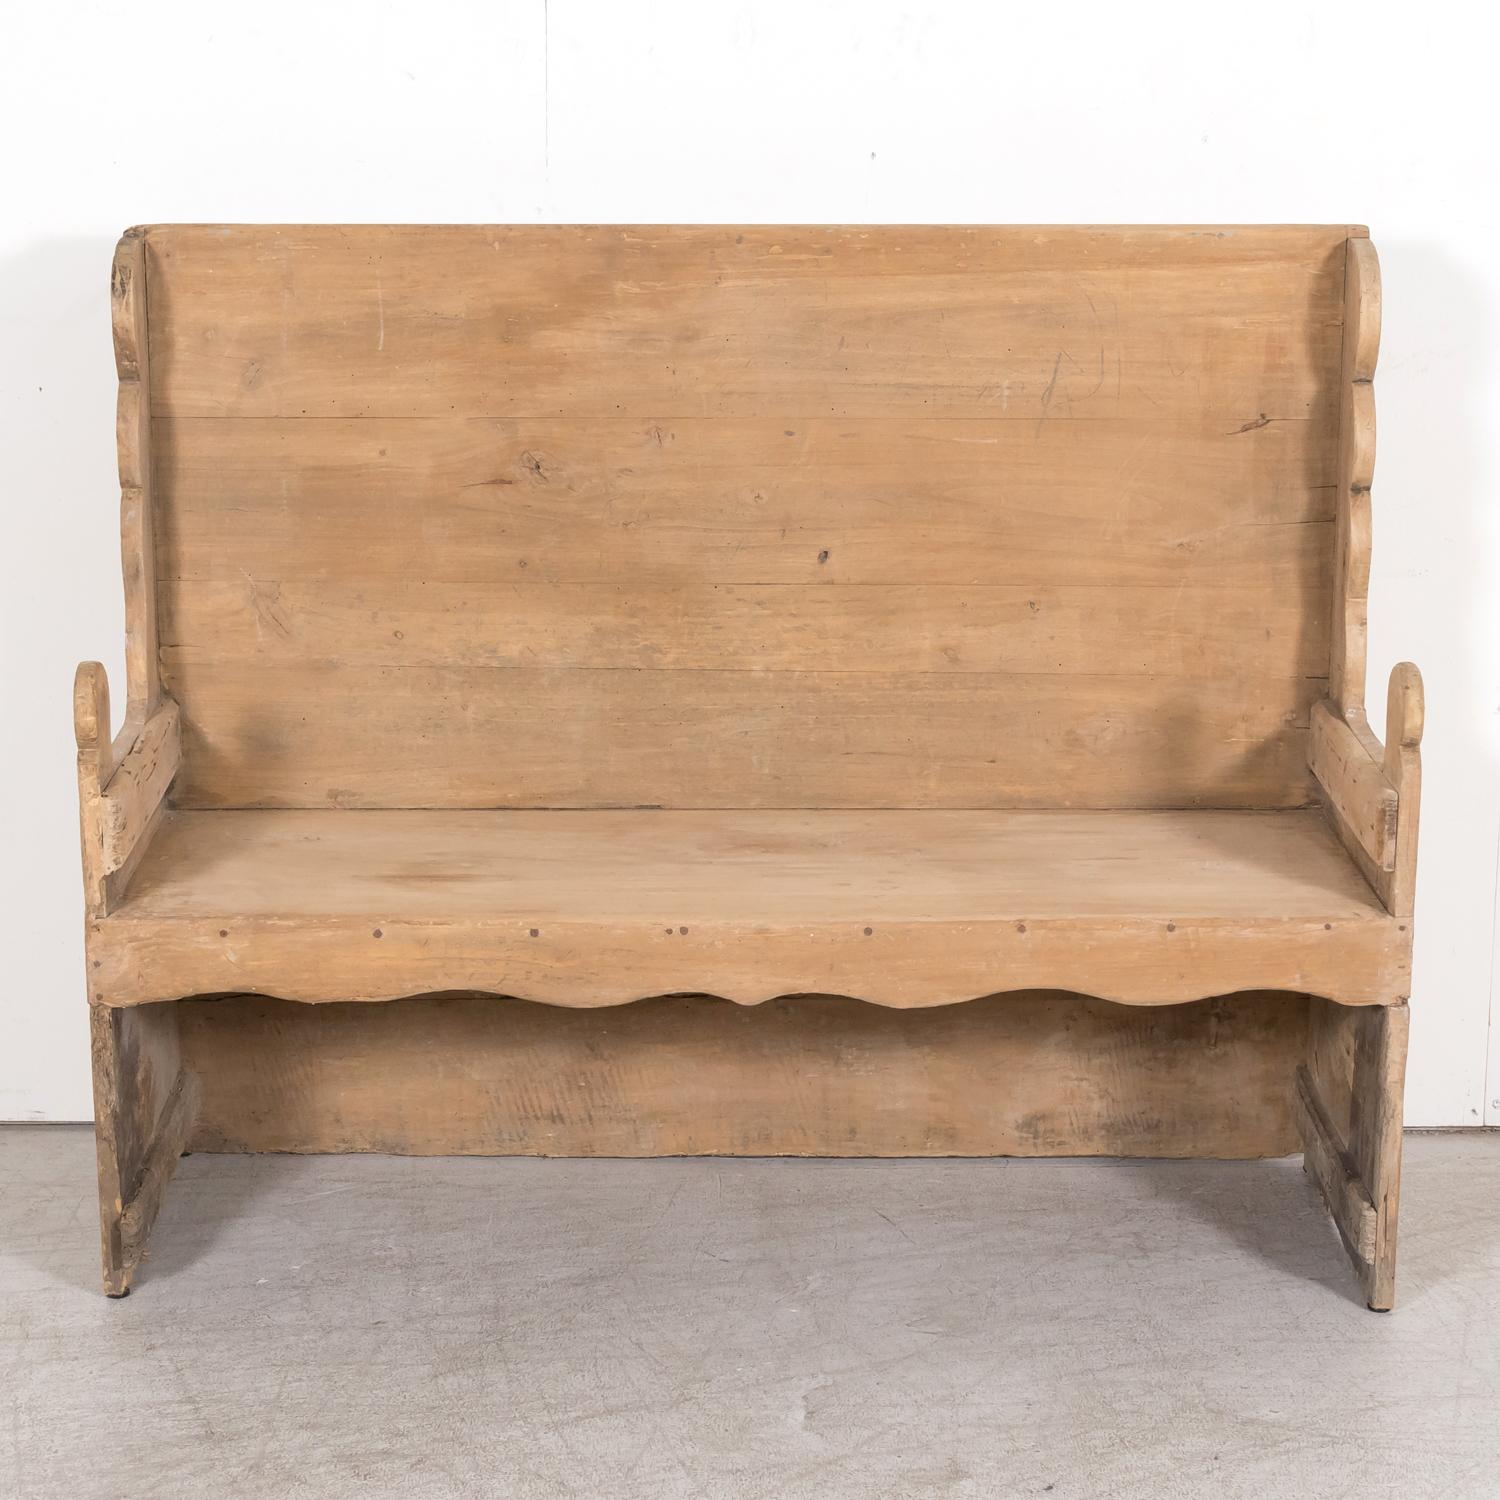 A late 18th century primitive settle bench handcrafted in the Catalan region of Spain of mélèze, a hard pine grown in mountainous regions, circa 1790s. Having a carved scalloped wing back and scalloped apron, this handsome Spanish bench features